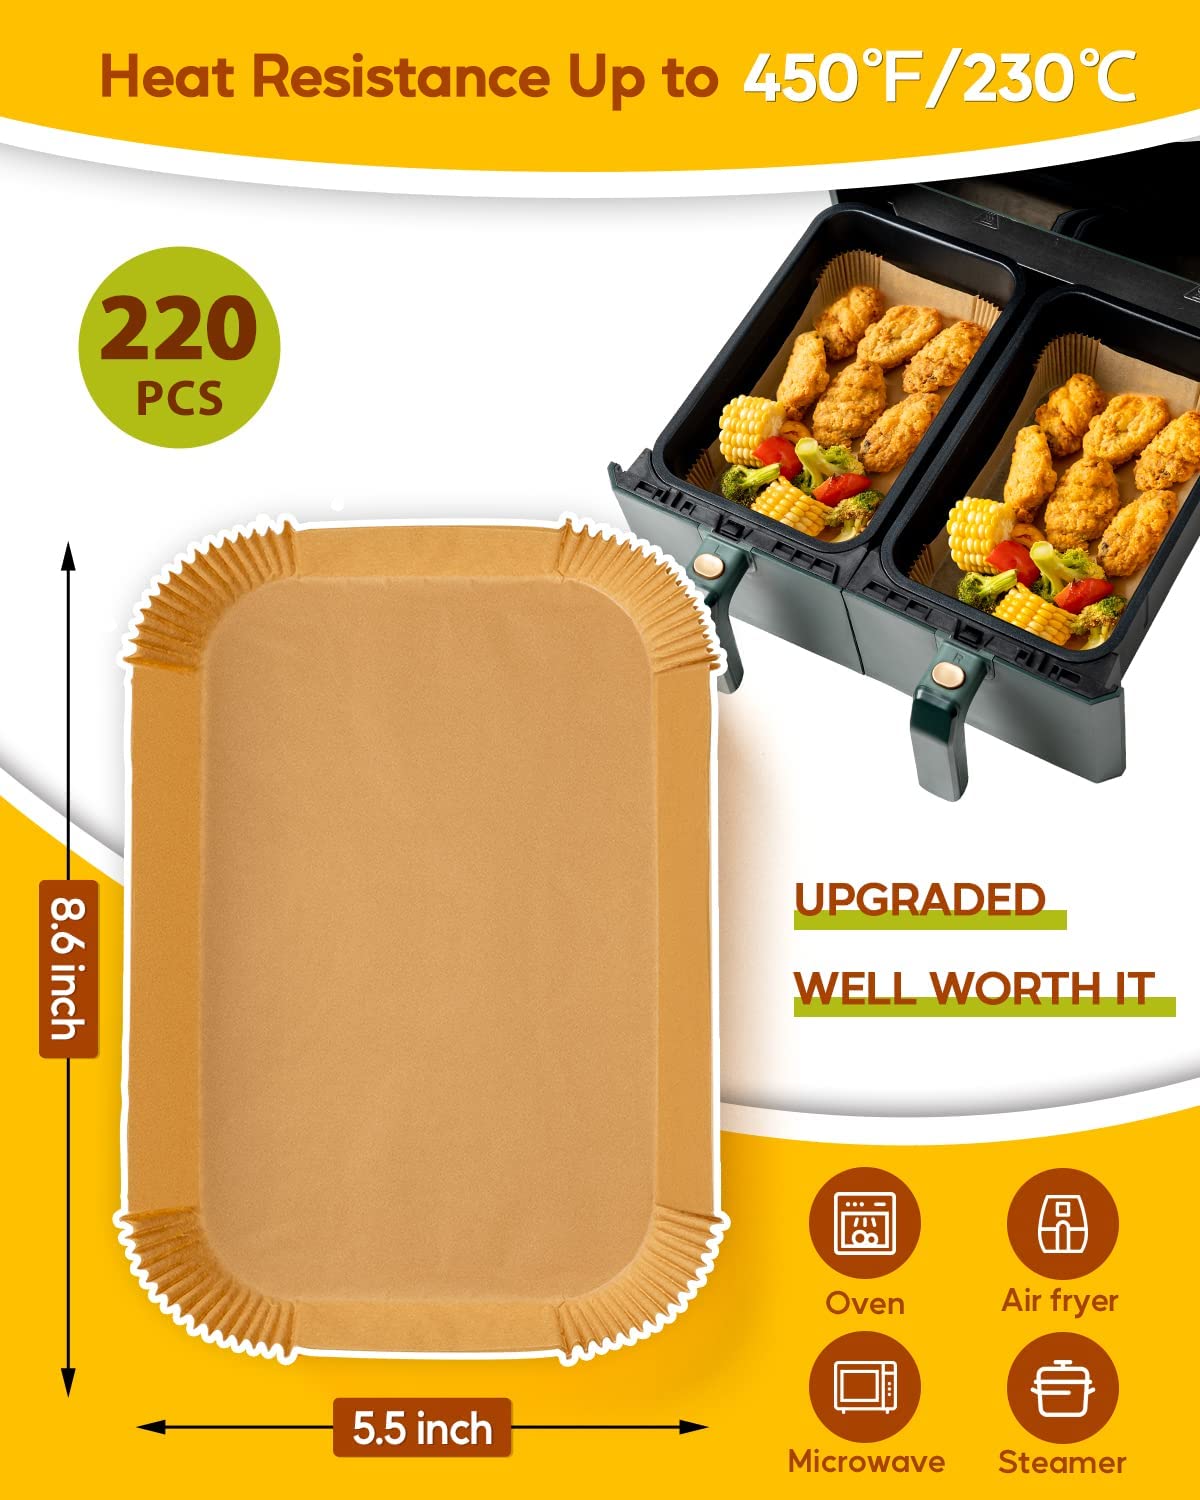 Air Fryer Liners For Ninja Foodi,, Disposable Parchment Air Fryer